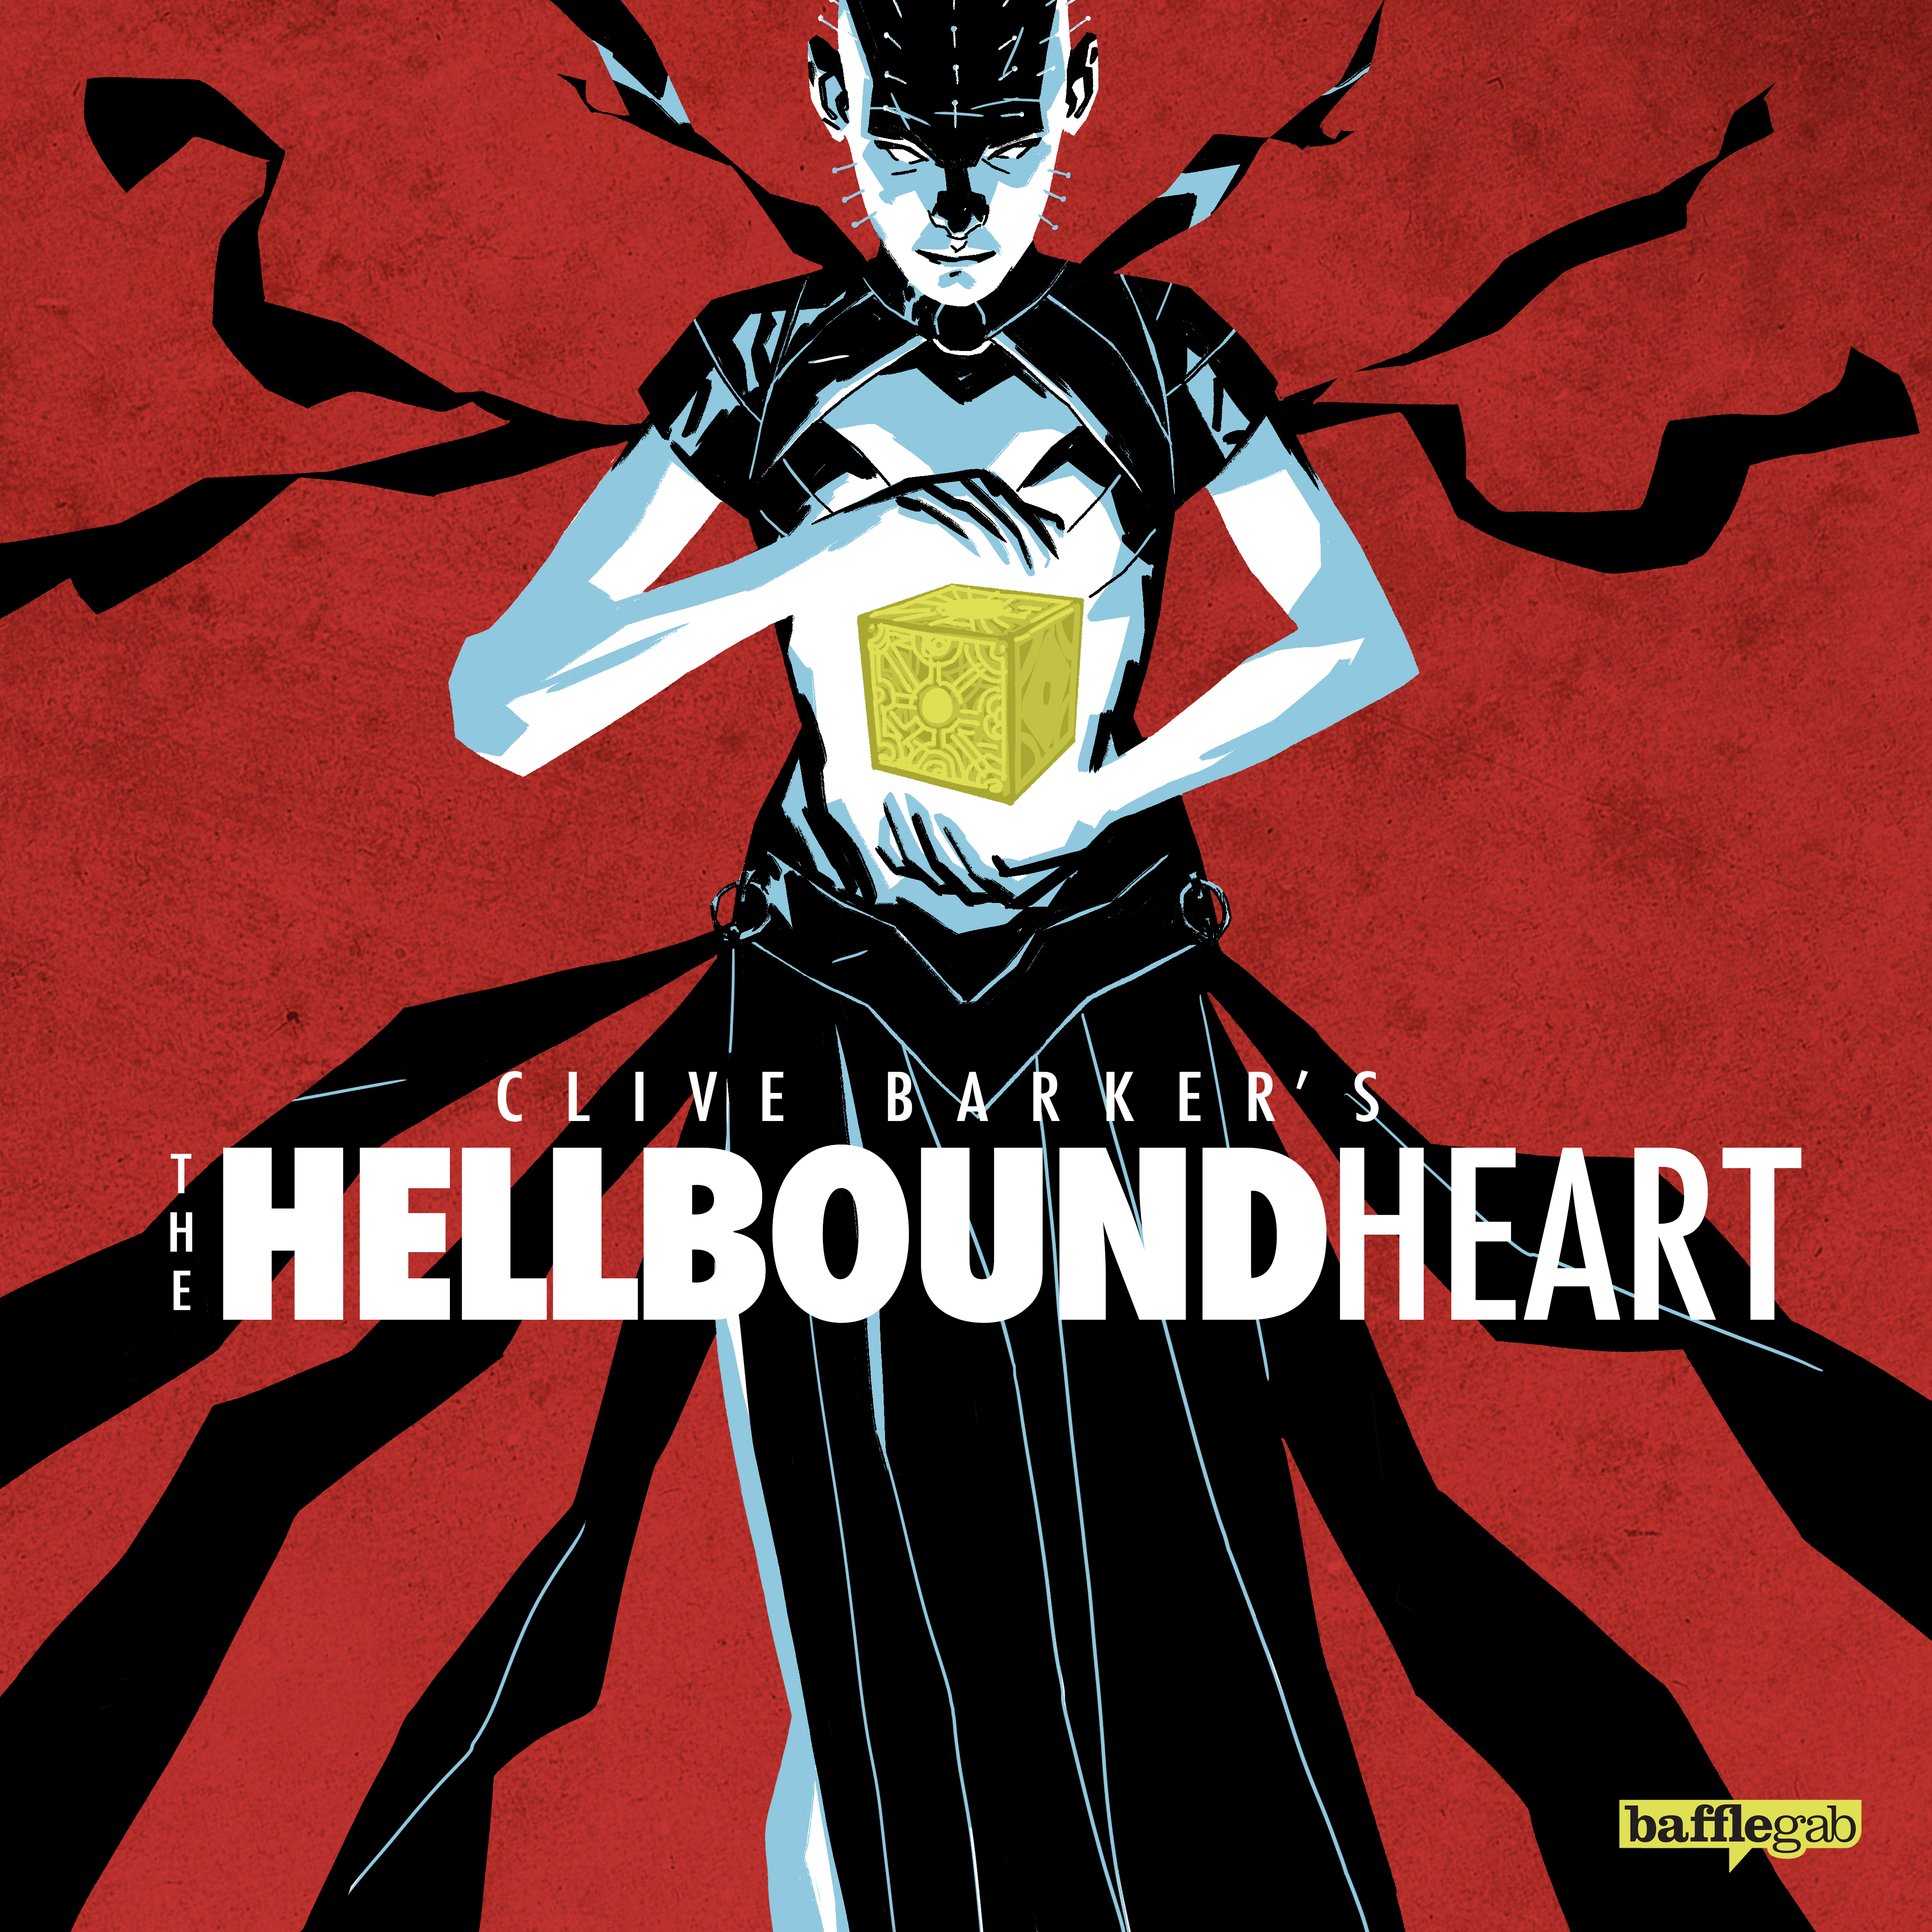 The Hellbound Heart audio review: Bafflegab takes on Clive Barker’s classic